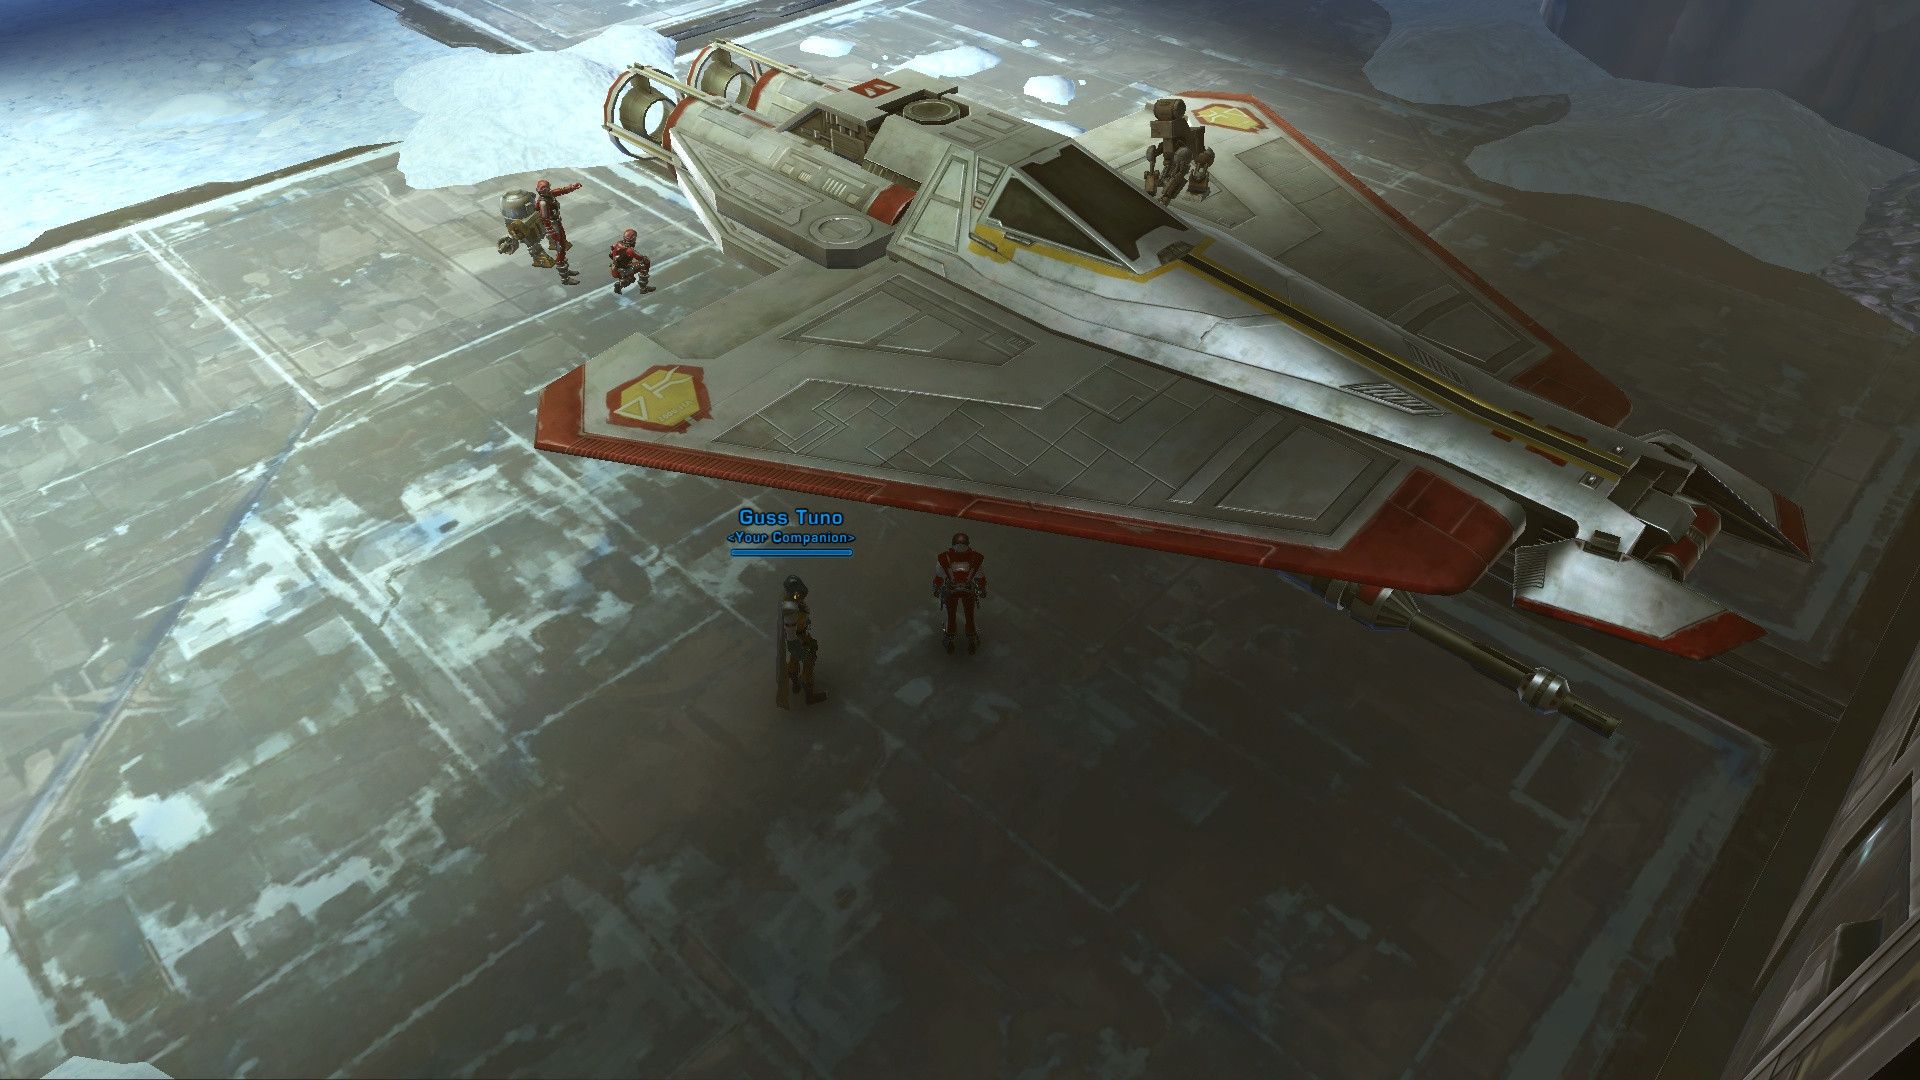 SWTOR Galactic Starfighter Guide to Flashfire / Sting. Starfighter, Galactic, Star wars